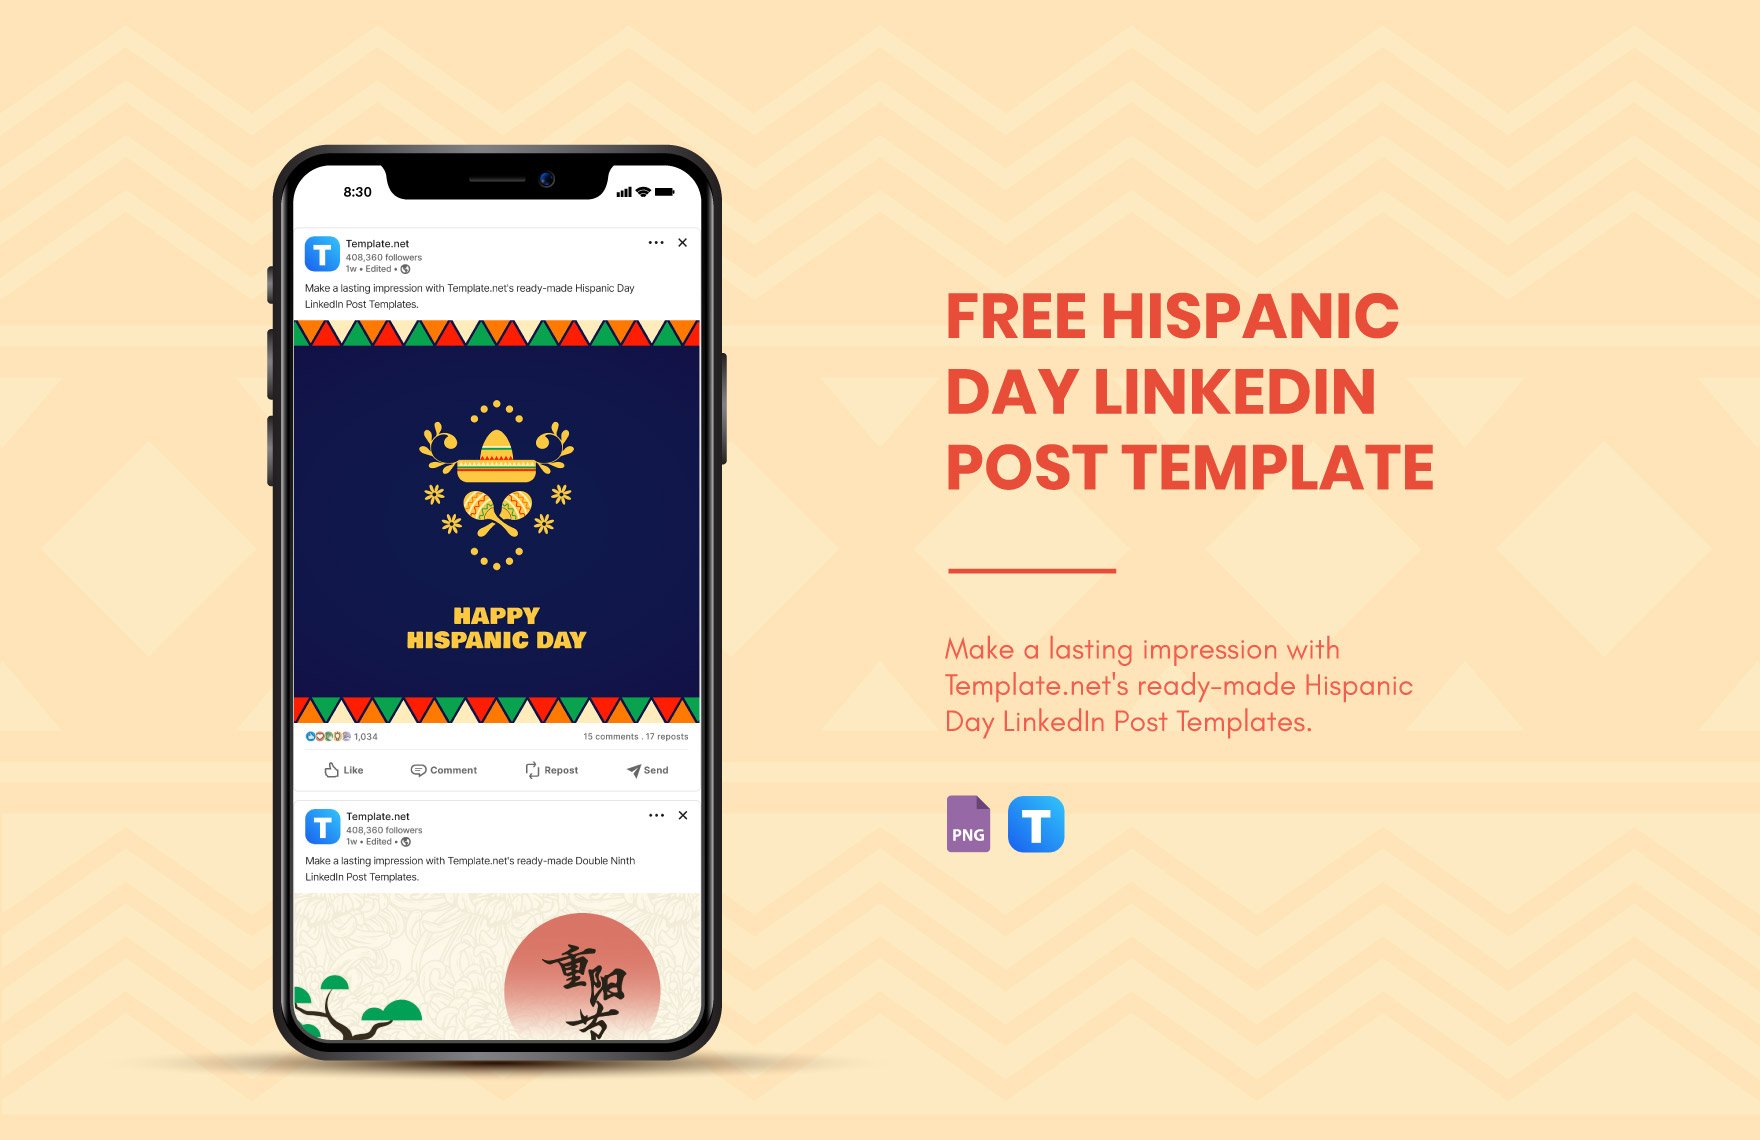 Free Hispanic Day LinkedIn Post Template in PNG